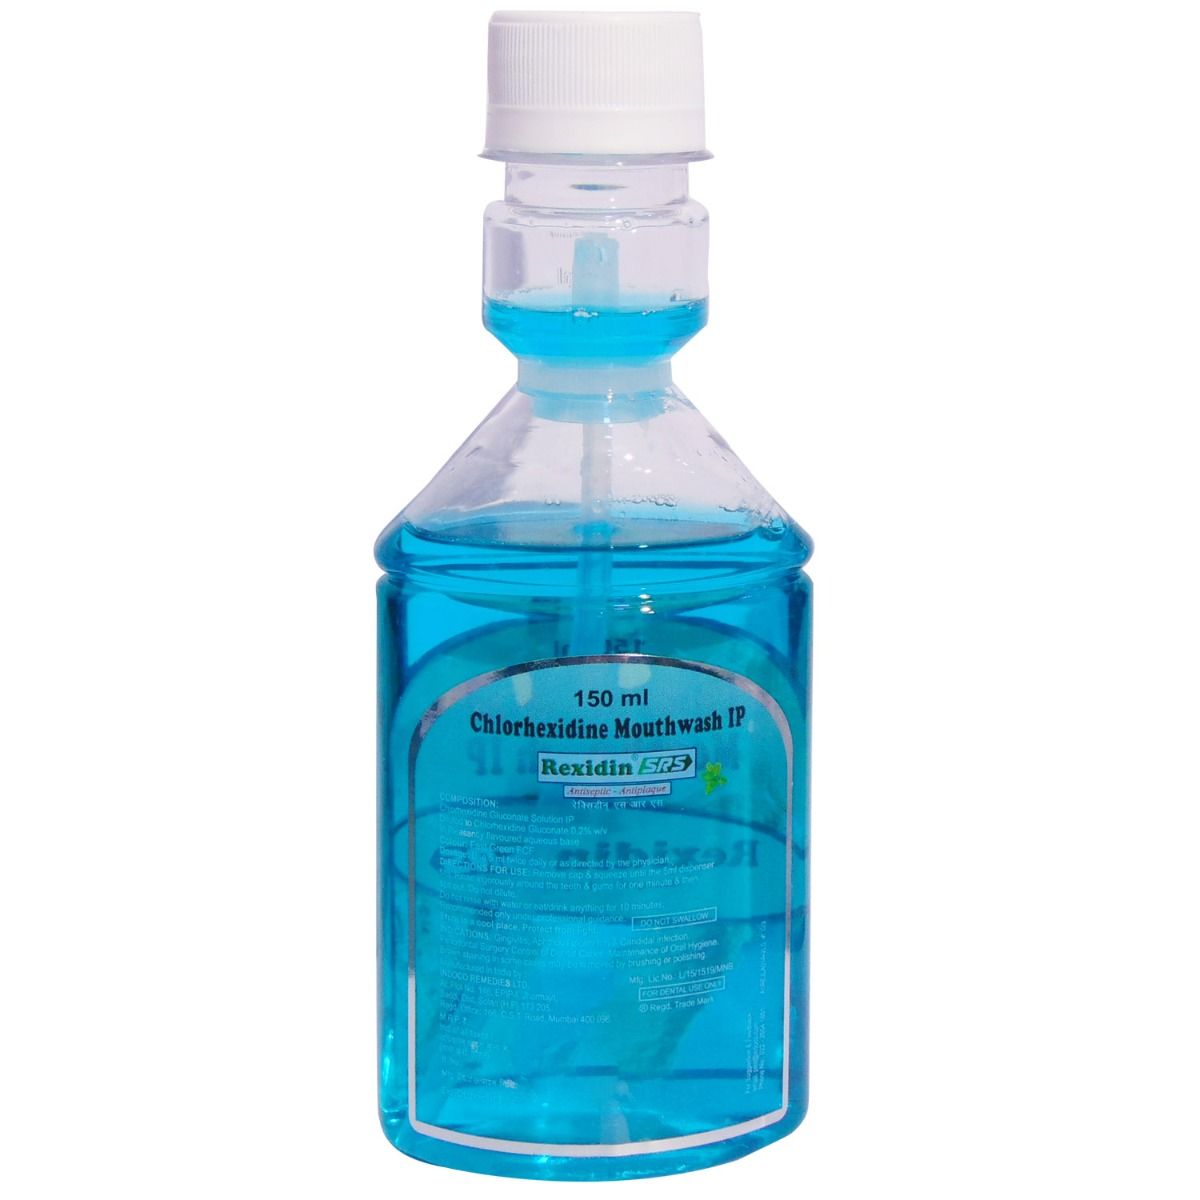 Rexidin SRS Mouth Wash 150 ml, Pack of 1 Mouth Wash